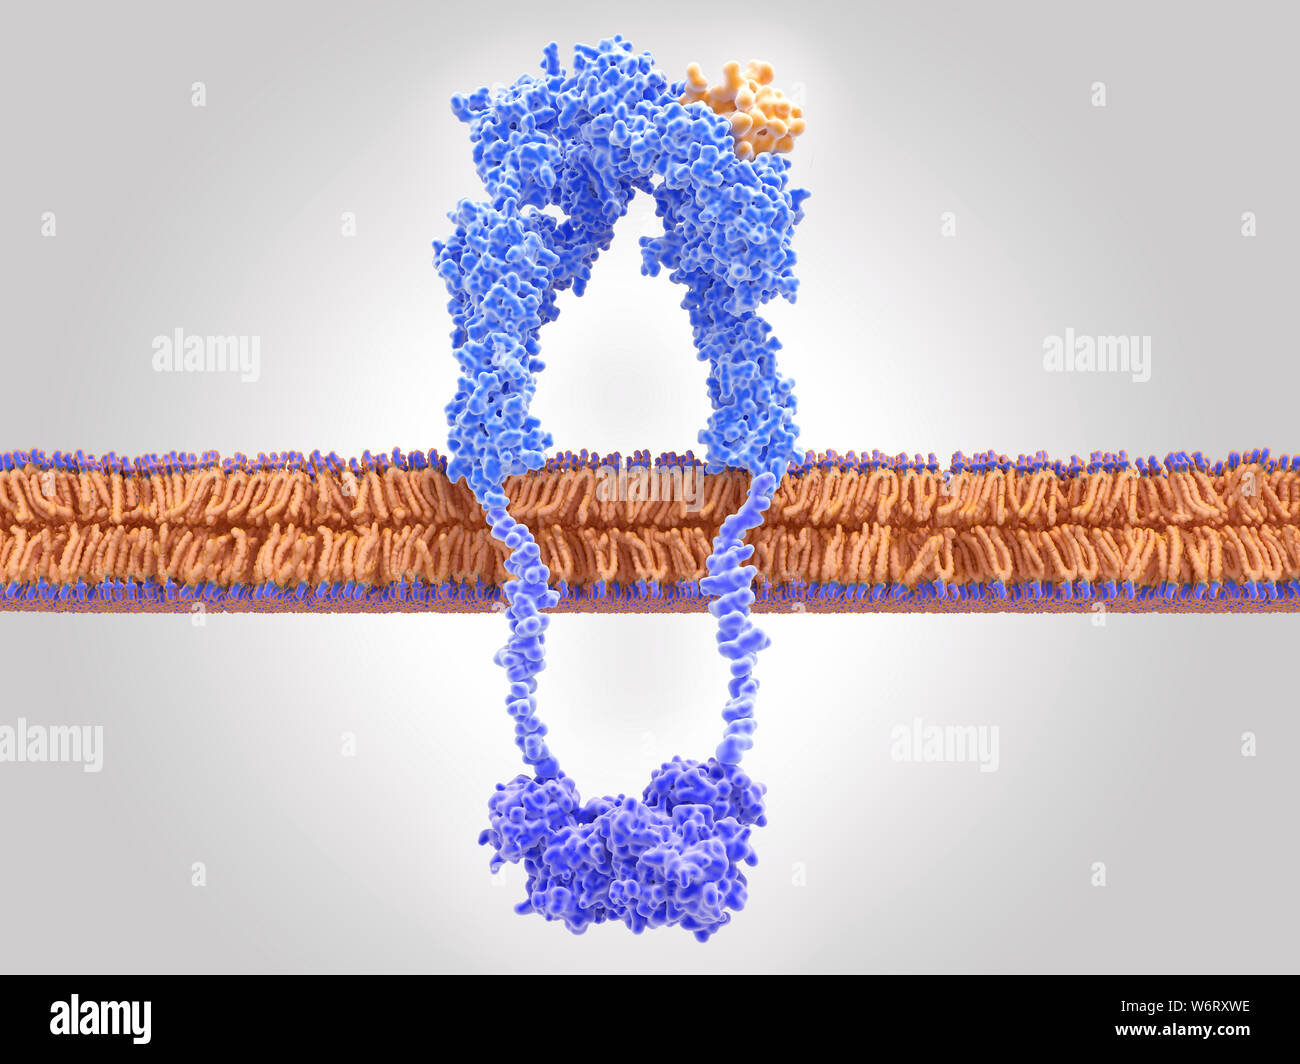 Active insulin receptor, illustration. The insulin receptor (blue) is a transmembrane protein, that has become activated through the binding of insulin (orange). Insulin binding induces structural changes within the receptor. These changes trigger a biochemical chain of events inside the cell (signal transduction), that finally leads to the transport of glucose into the cell via activation of glucose transporters (channel proteins). Stock Photo